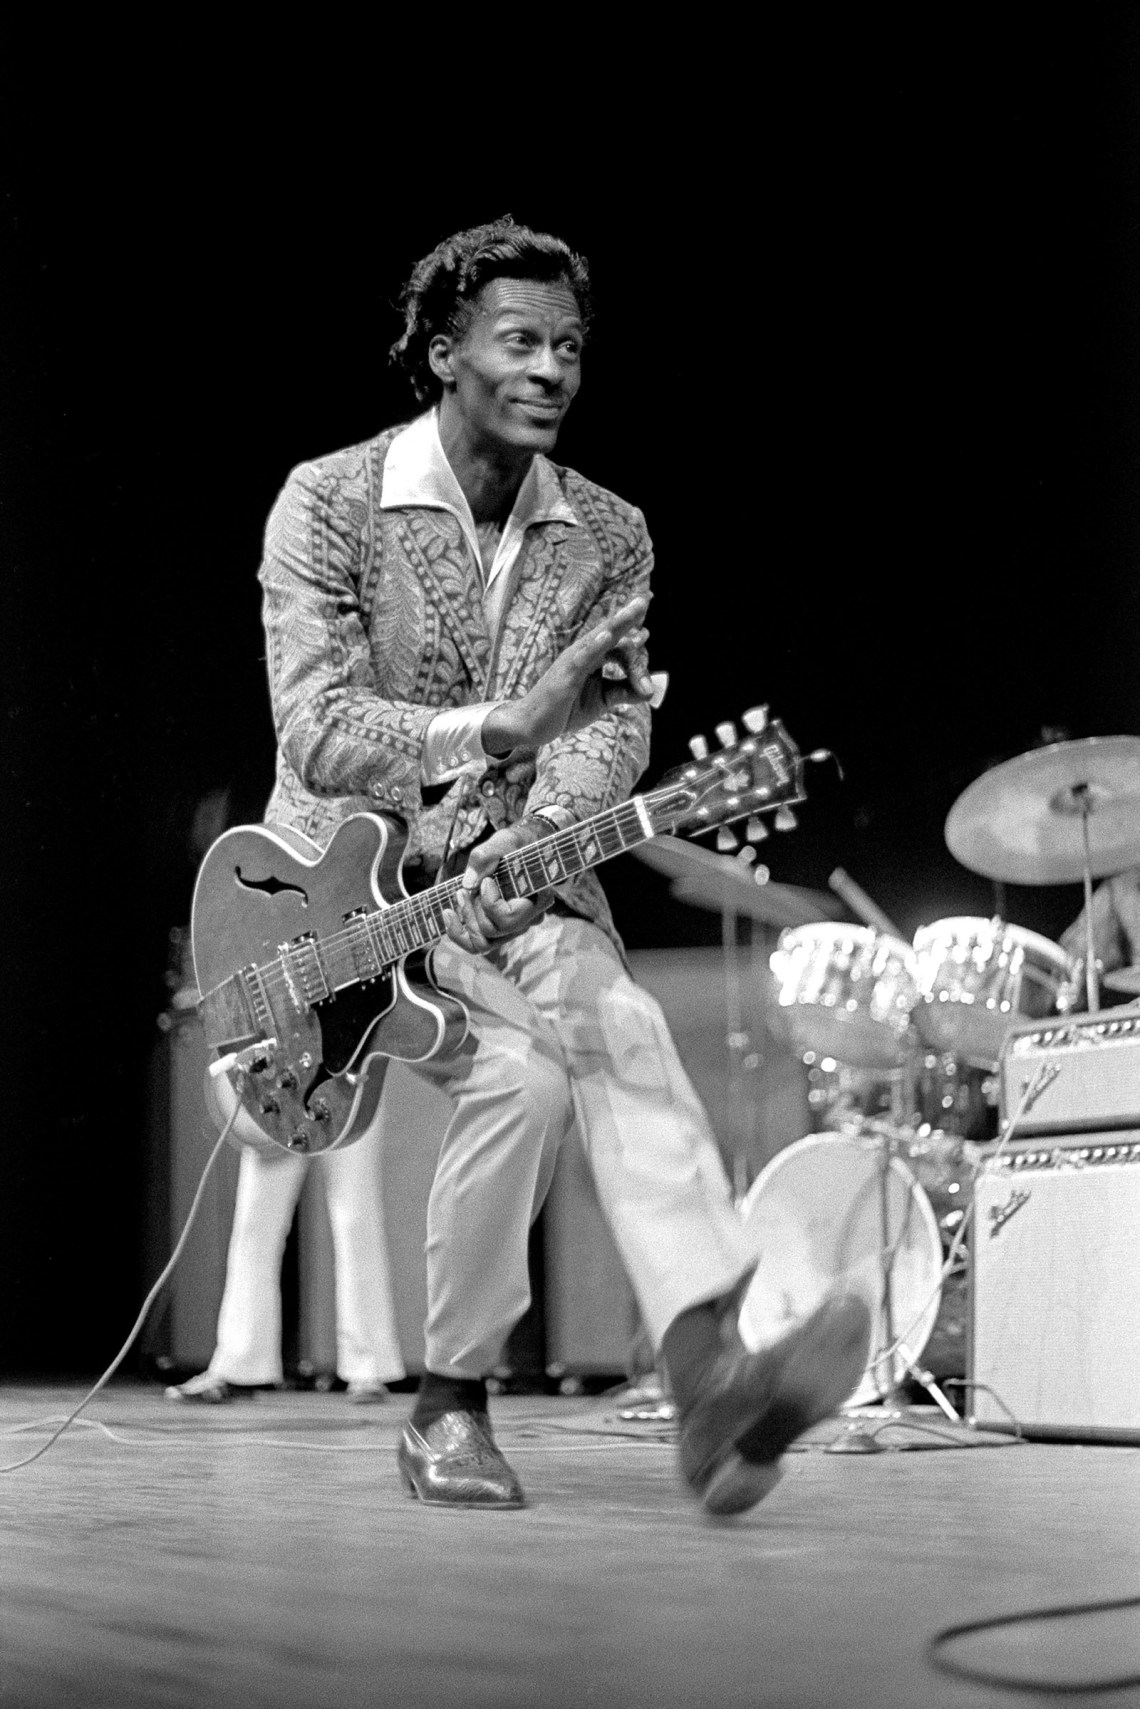 Chuck Berry duckwalking during a performance at the Berkeley Community Theater